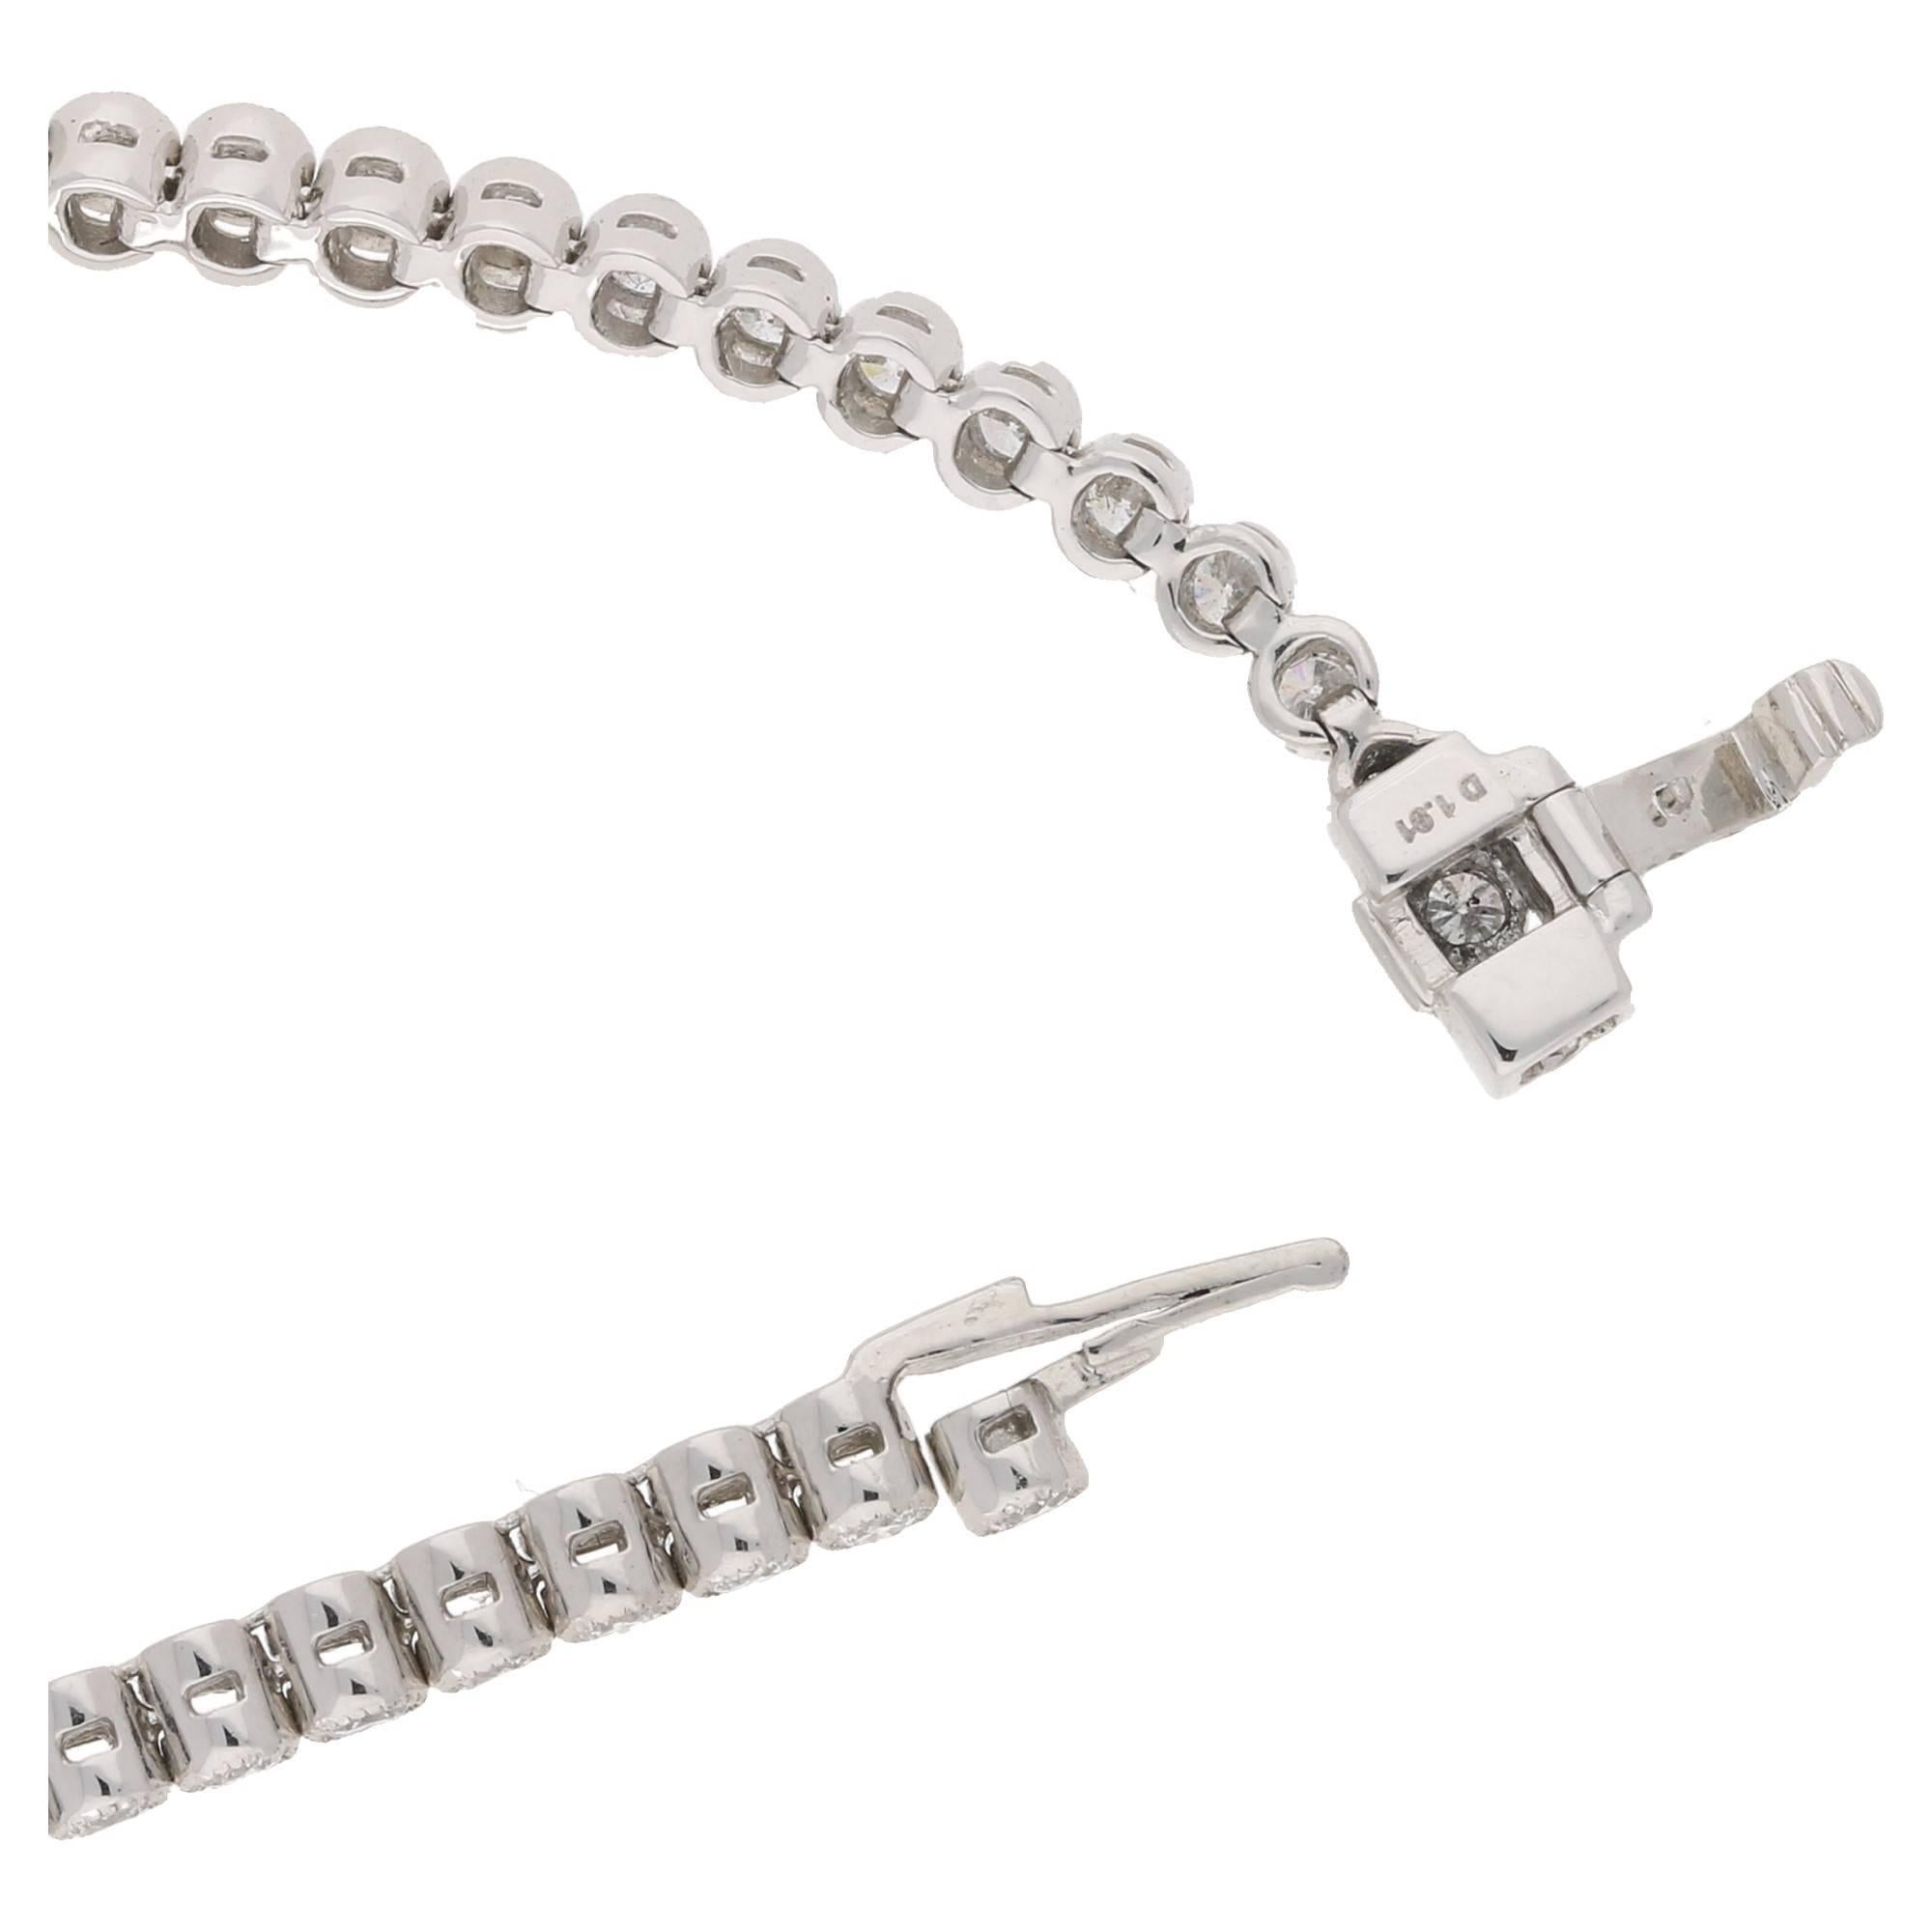 A platinum and diamond line bracelet. The bracelet is formed of seventy five round brilliant cut diamonds each in a spectacle setting with a millegrain finish. The bracelet is fitted with a tongue piece clasp with a under arm safety catch. Total